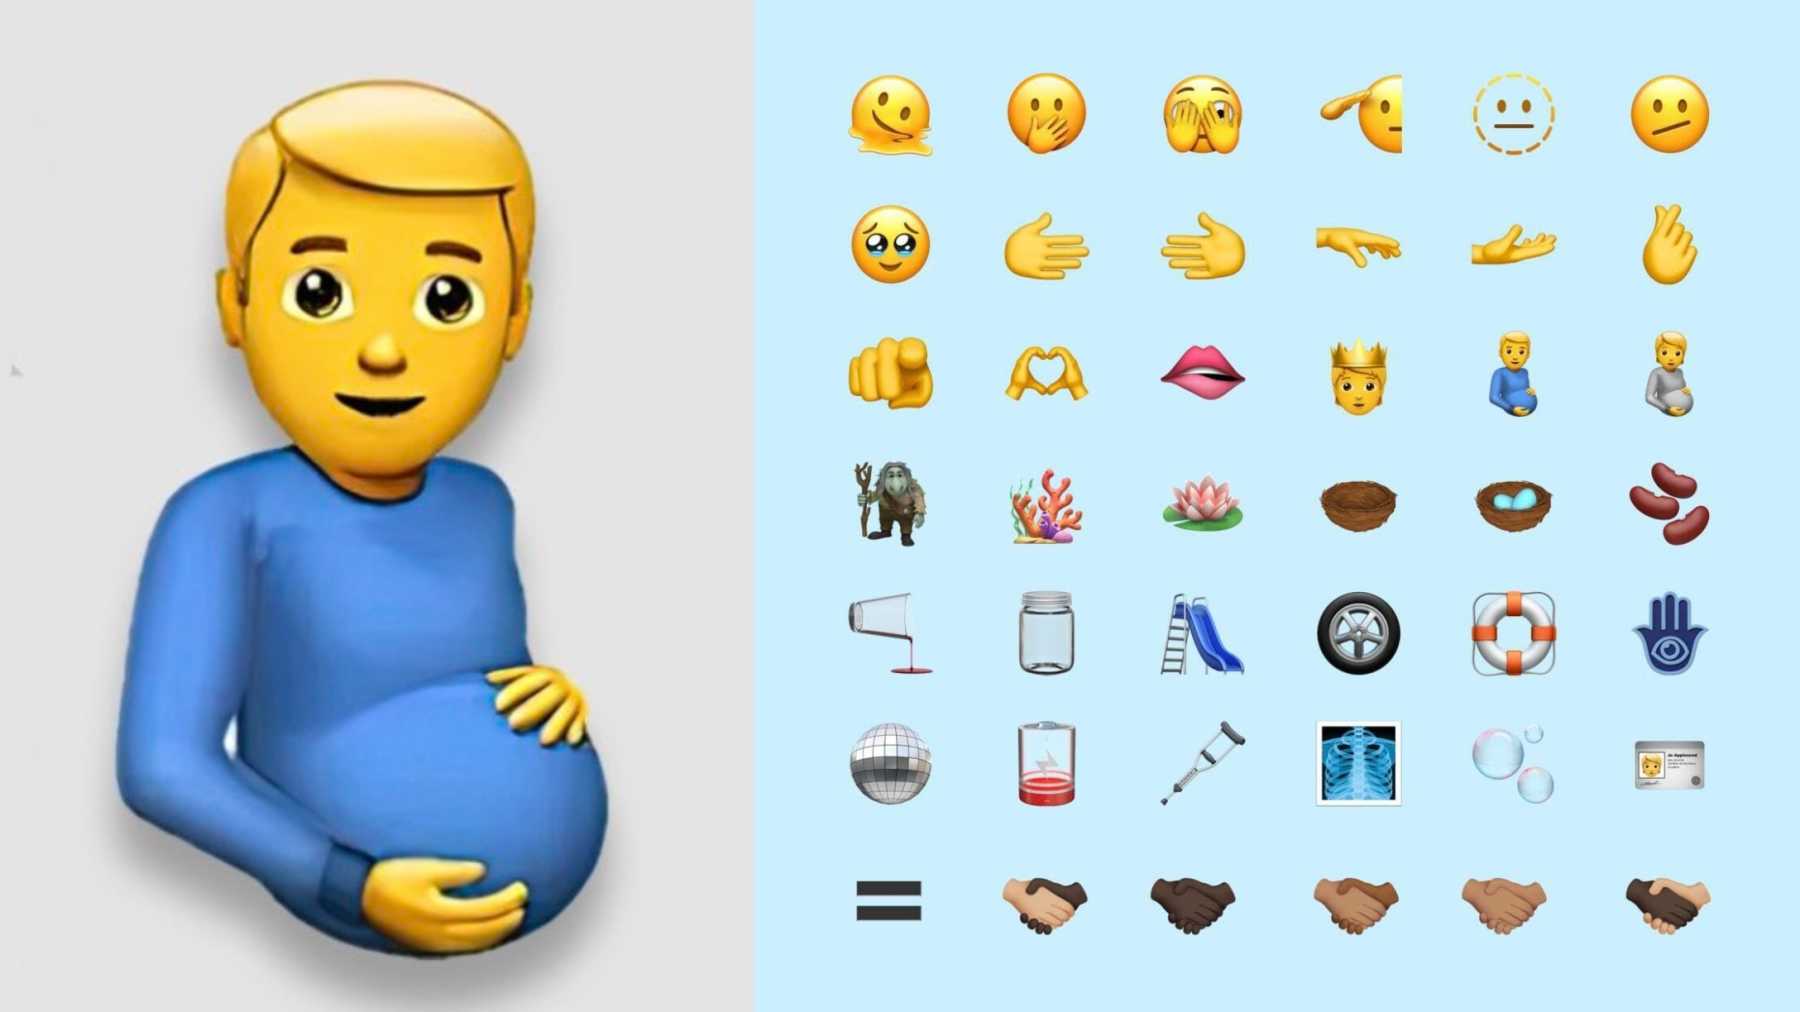 Apple releases 'Pregnant Man' emoji for iOS users, but internet seems unhappy